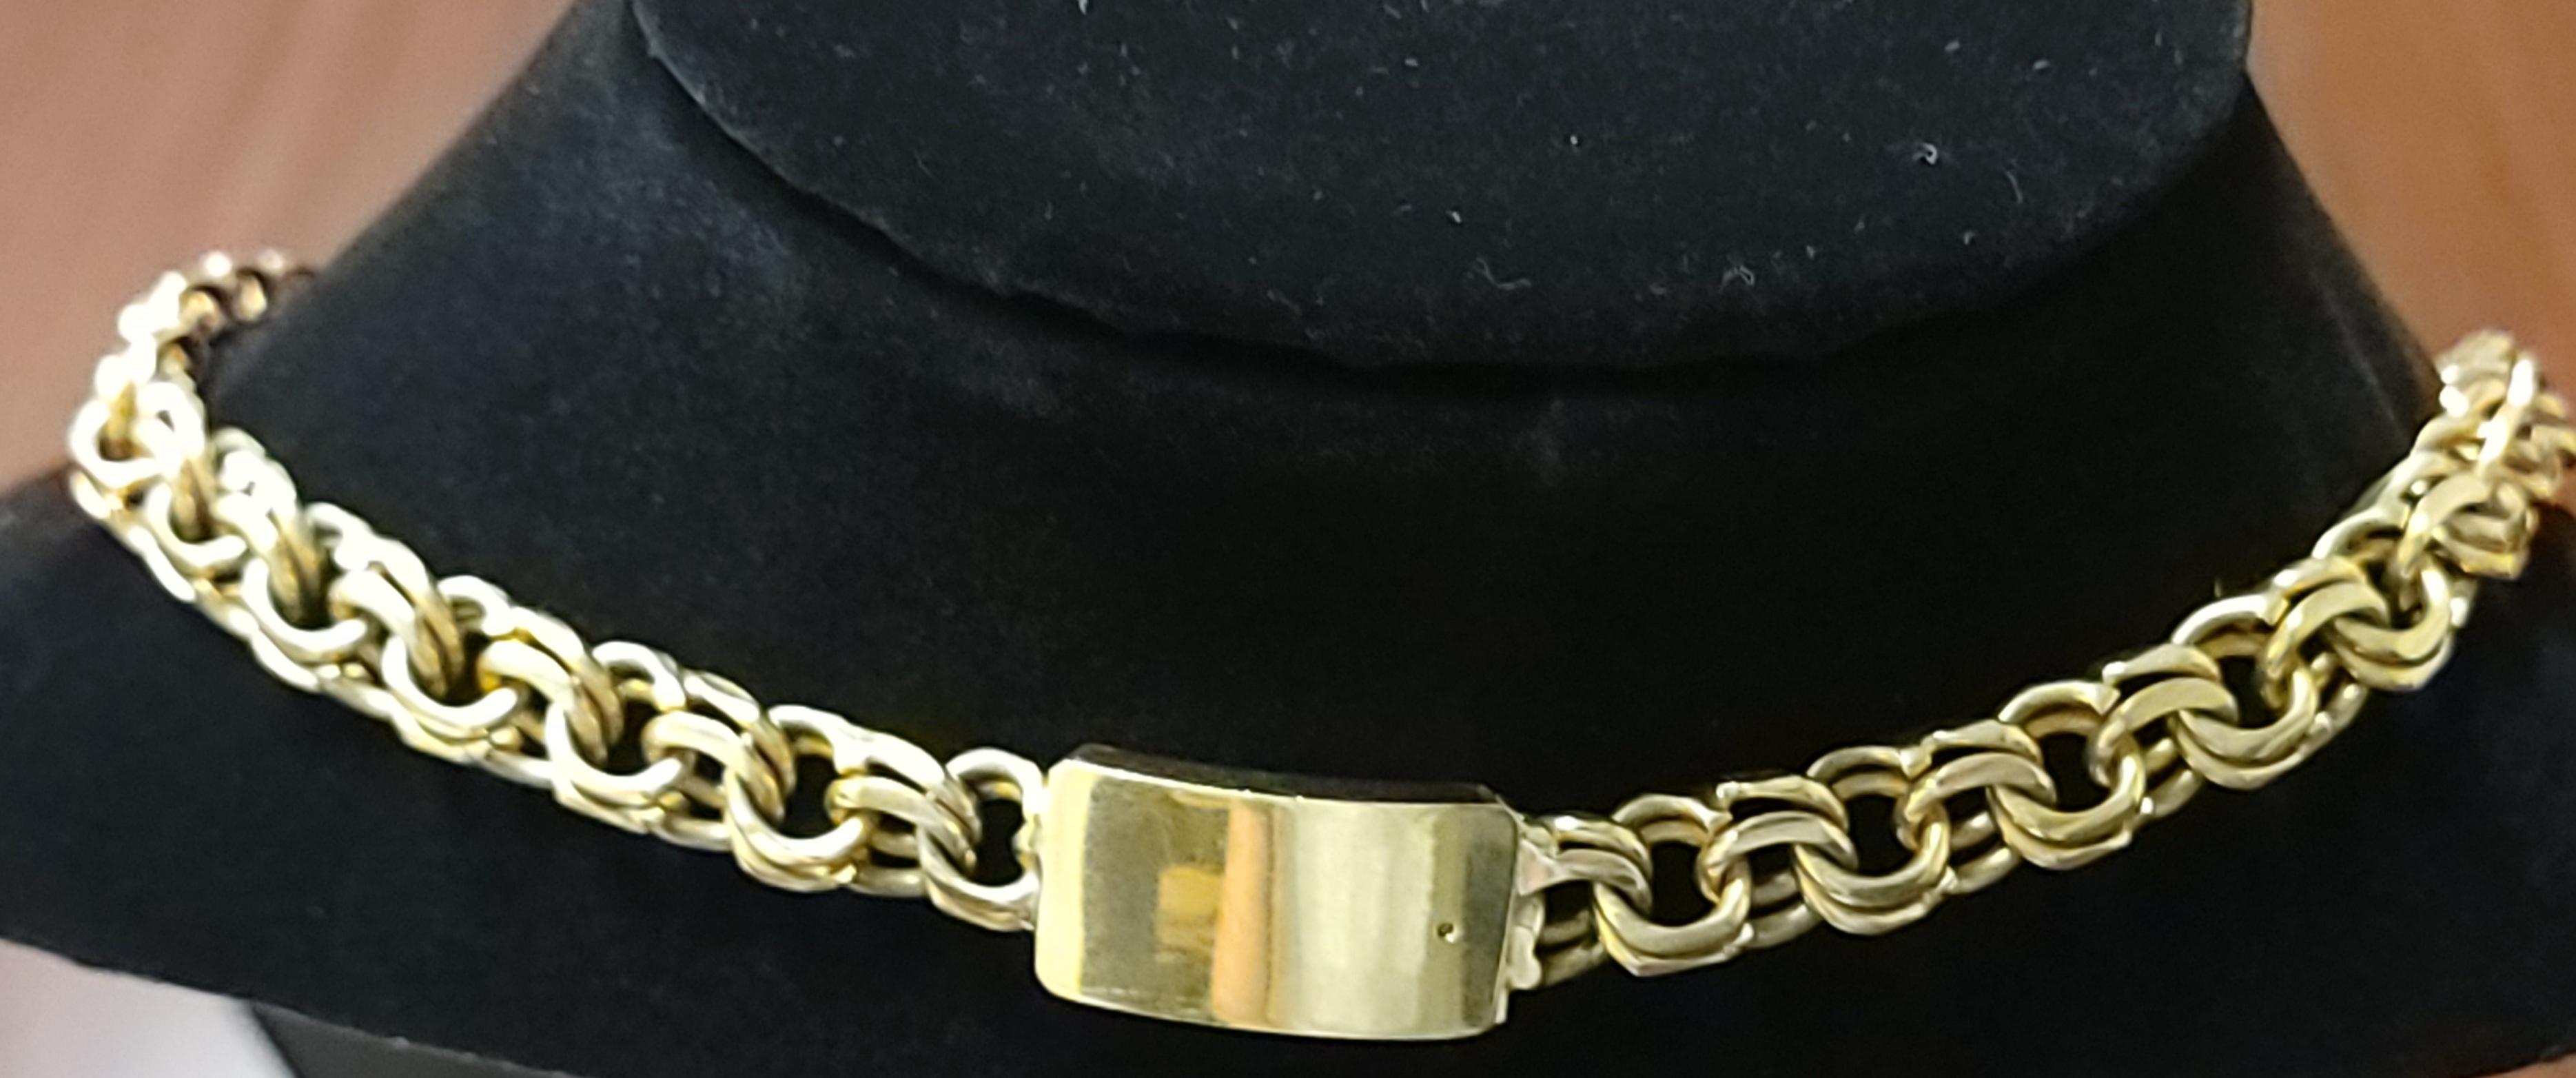 26" Chino Link Chain Necklace 10k gold